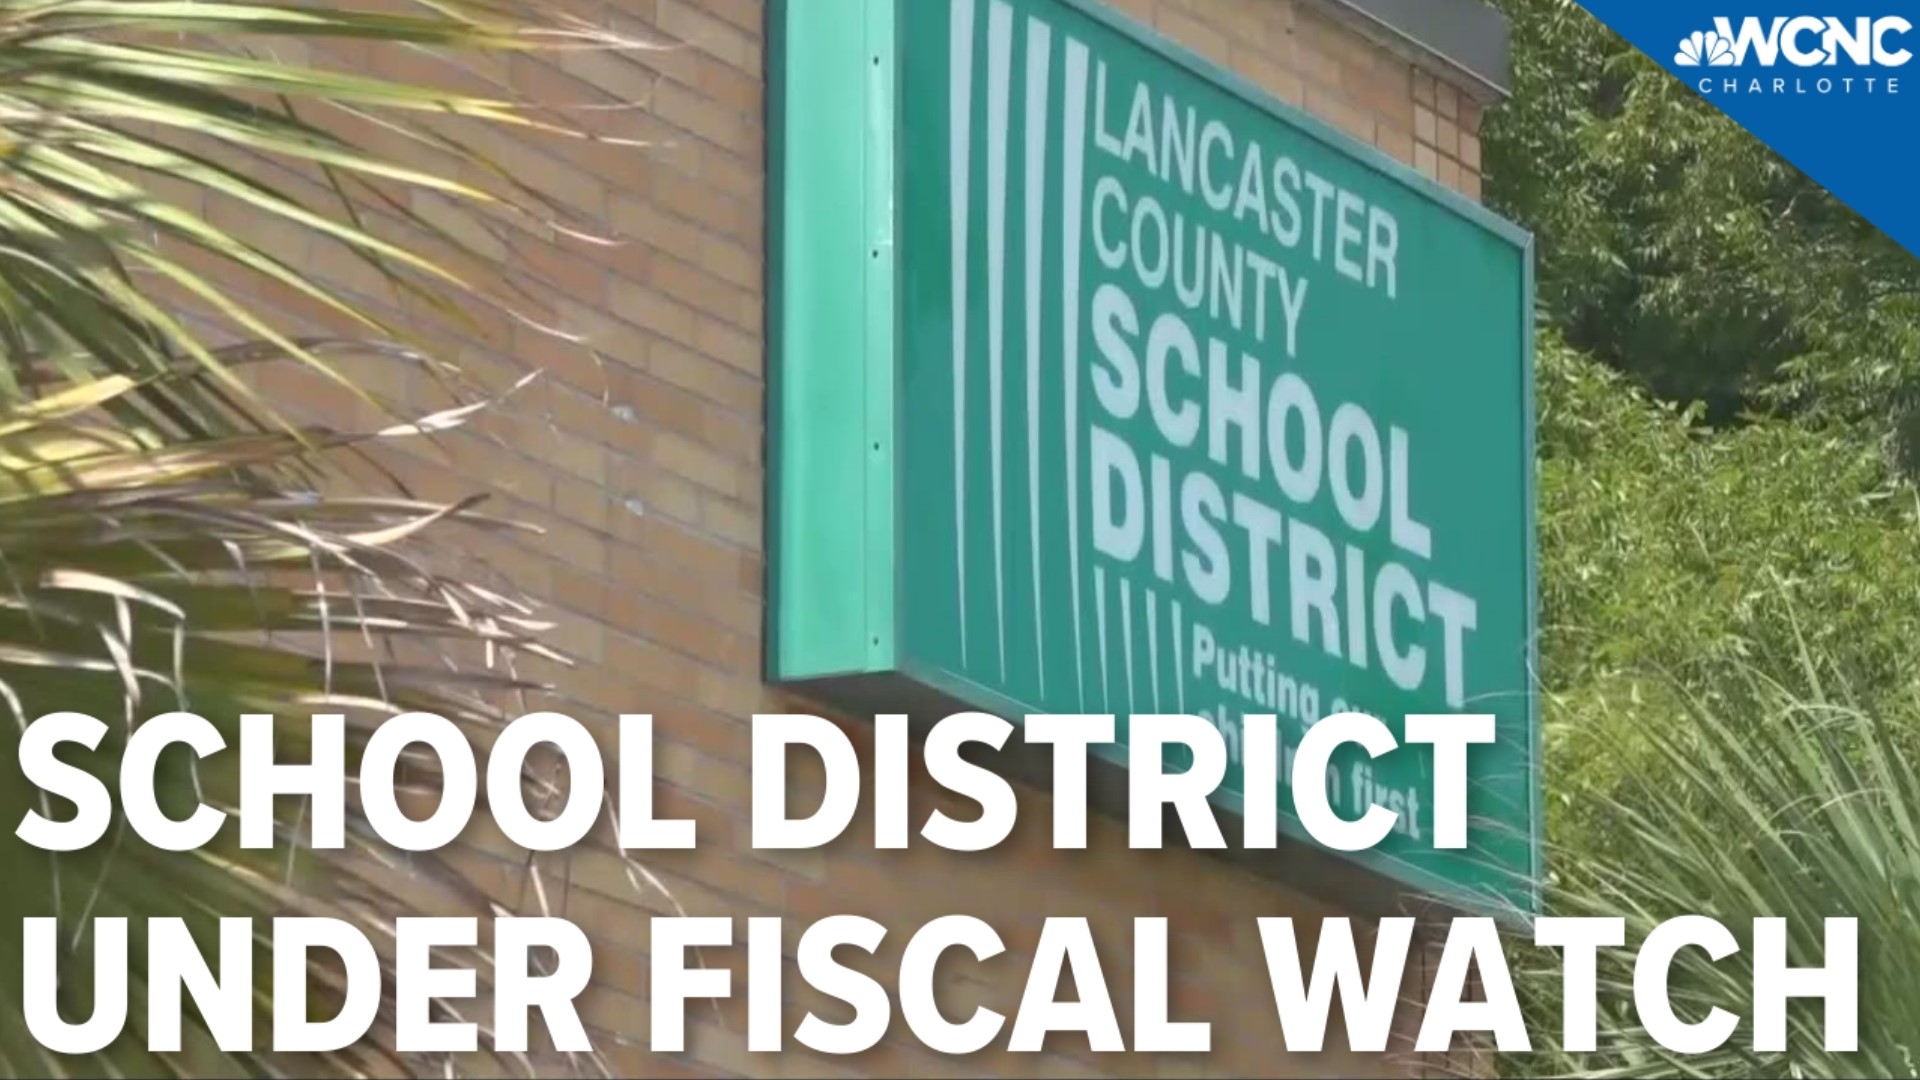 The original watch was sent last year because the state's education department was concerned with how the district was handling finances.